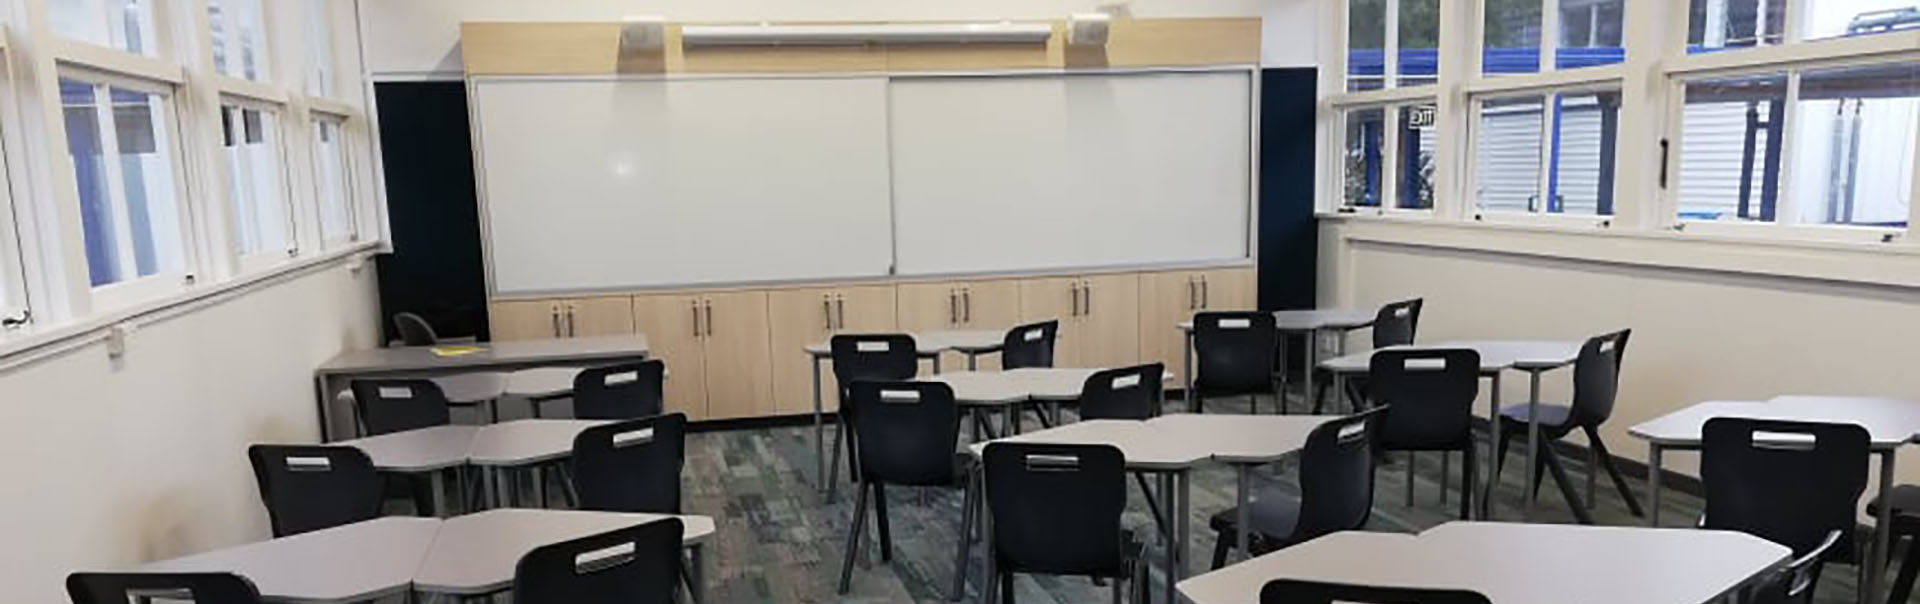 Newly renovated classrooms at OHS